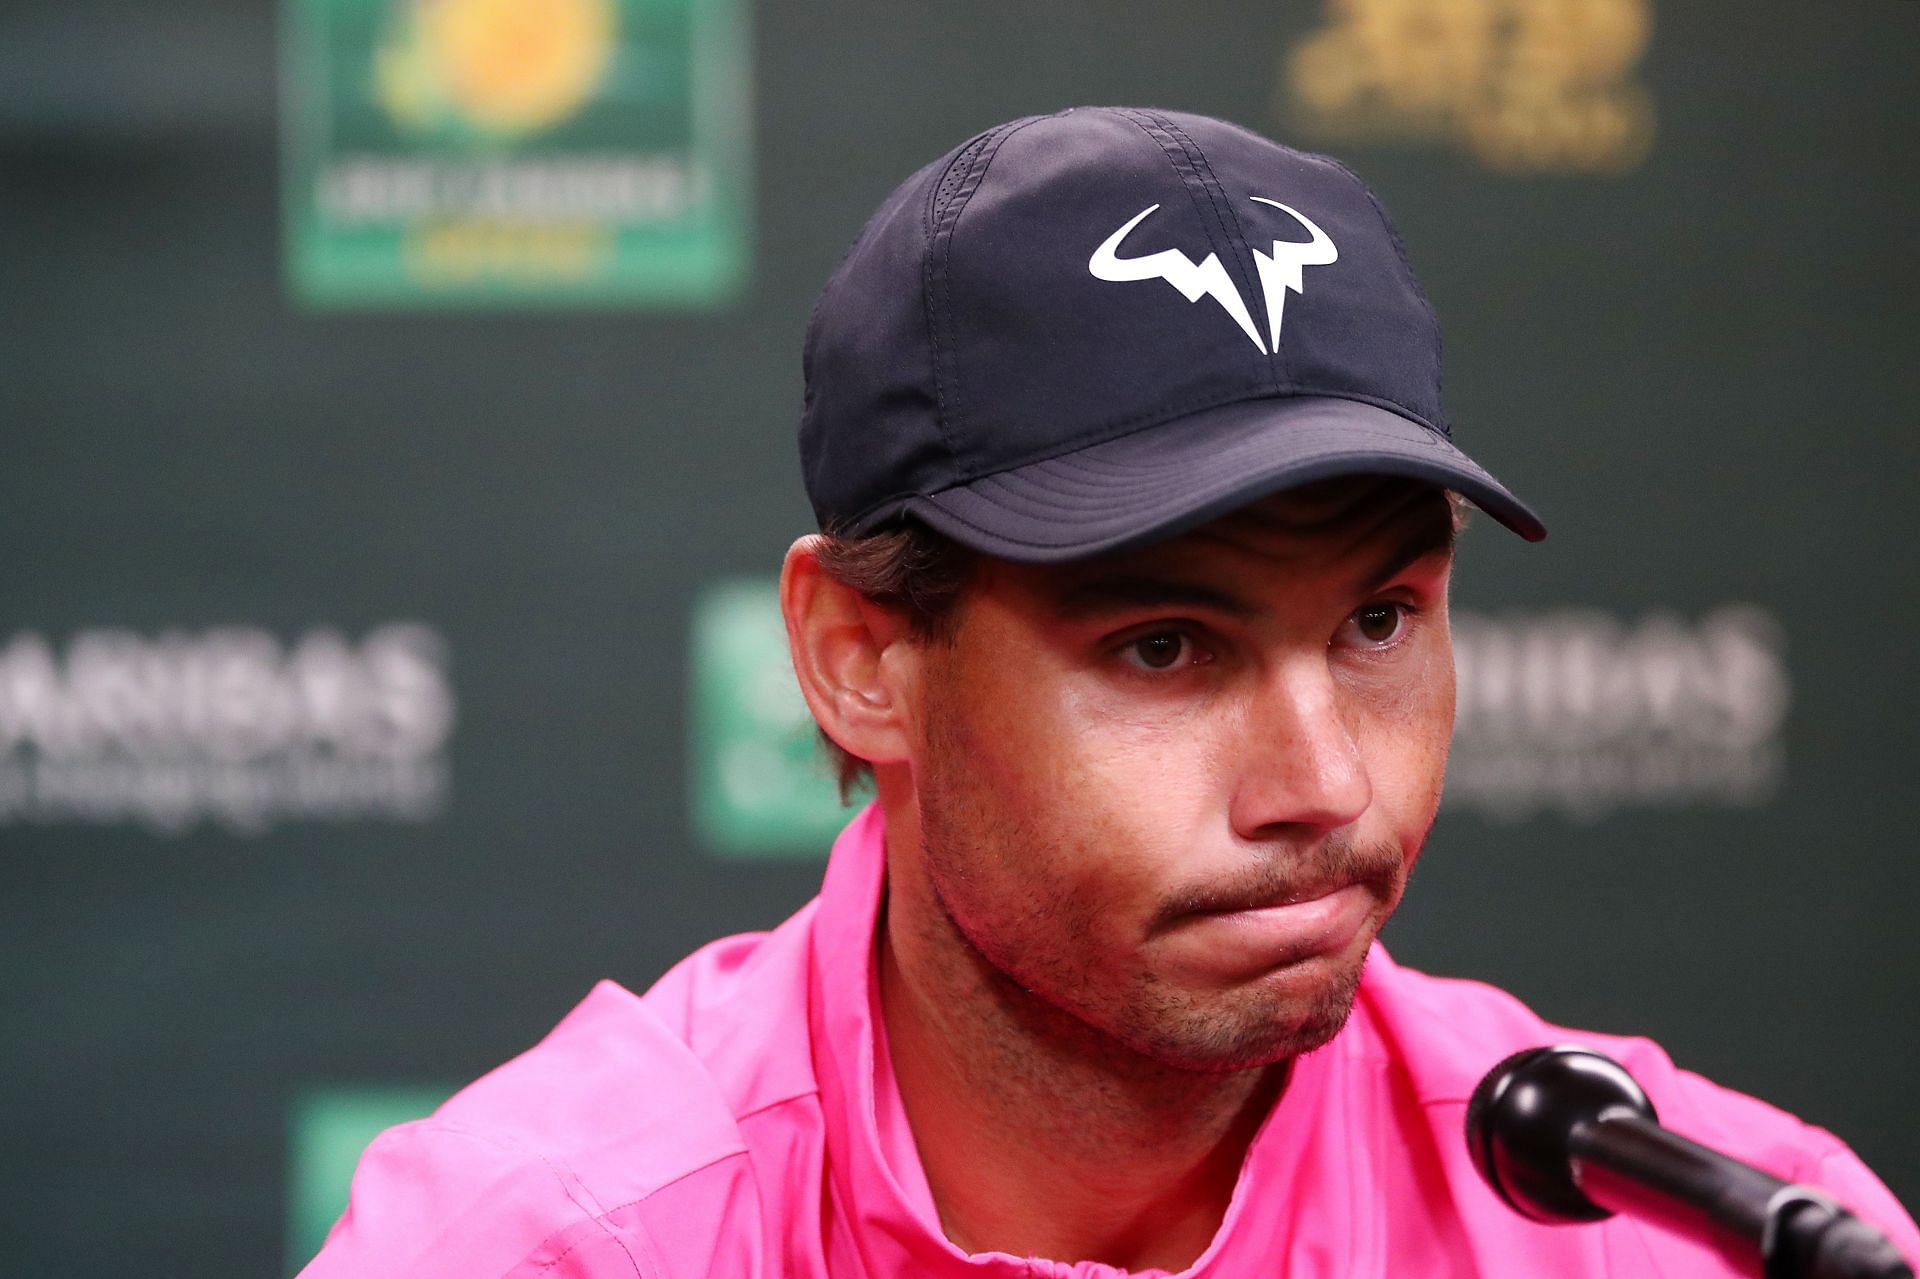 Rafael Nadal has been hampered by injuries this year.